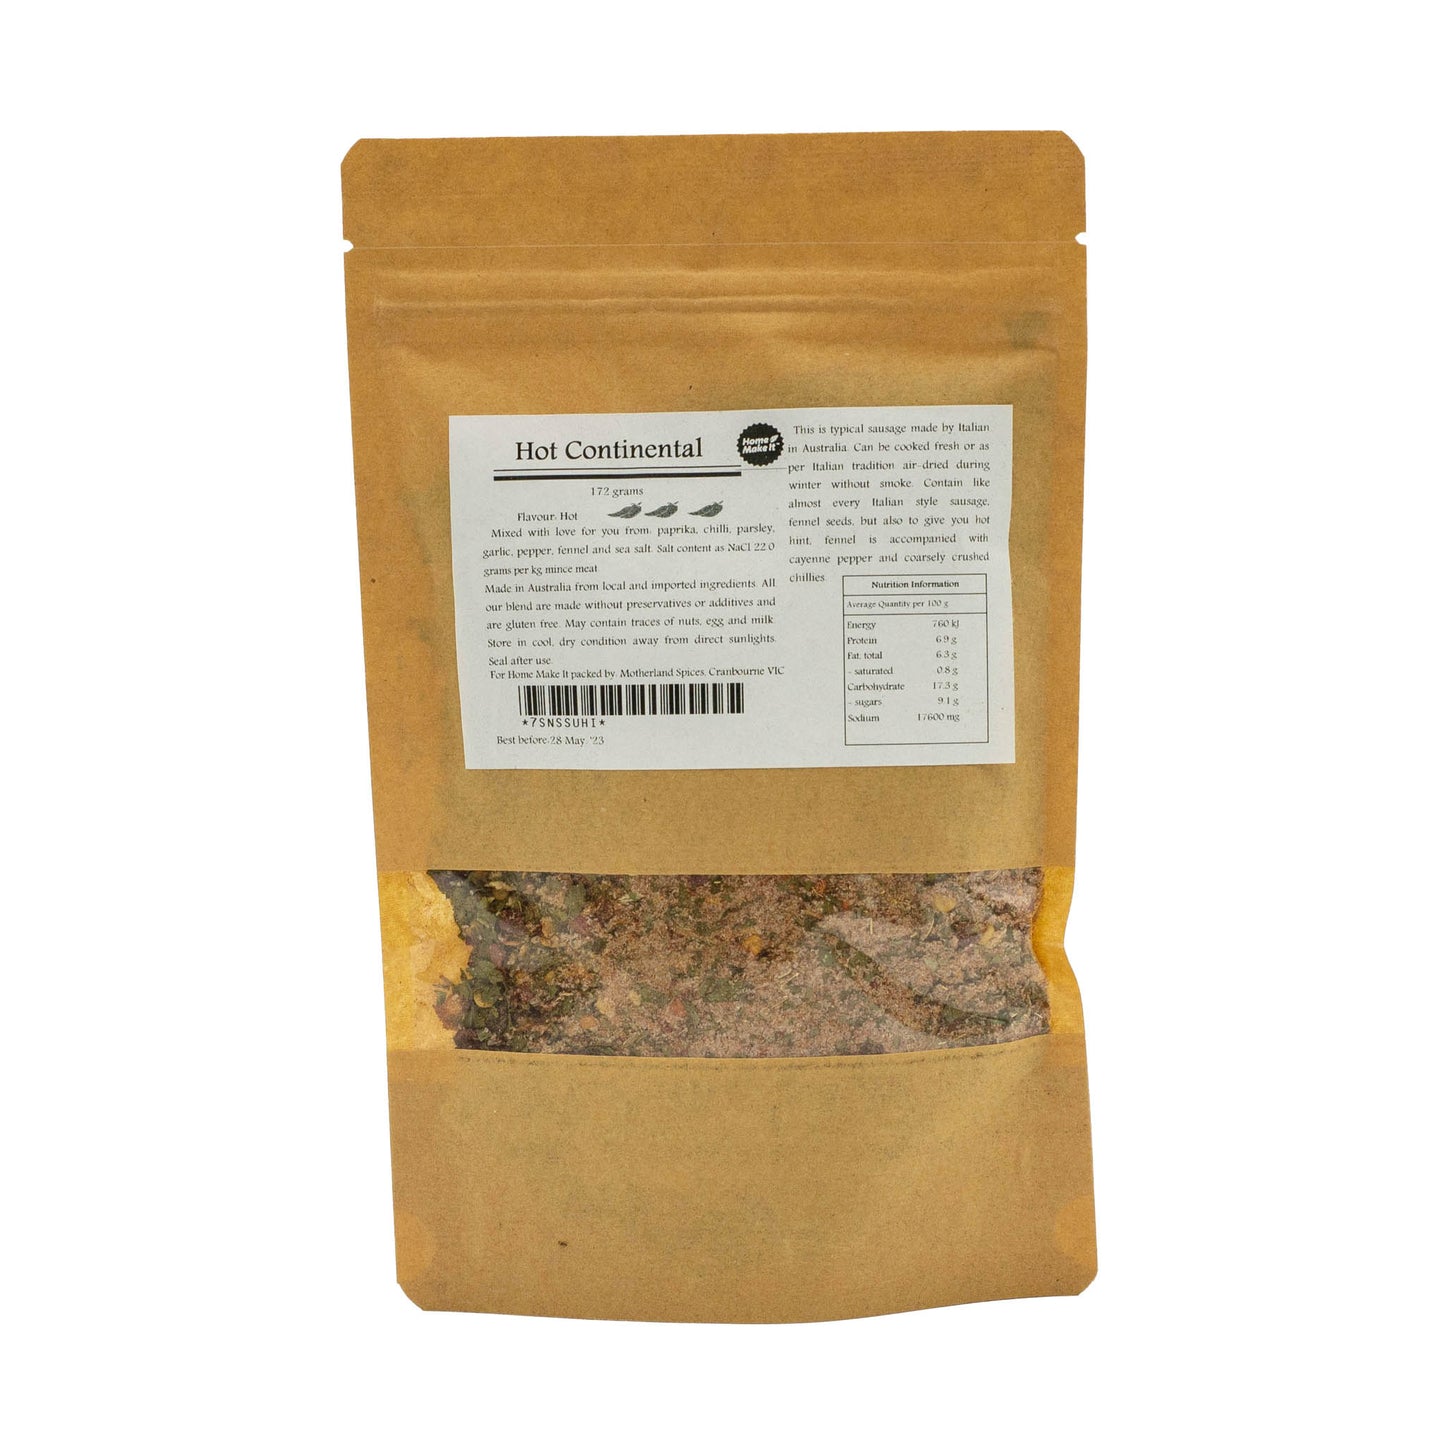 hot continental sausage spice recipe bag for up to 5kg of meat